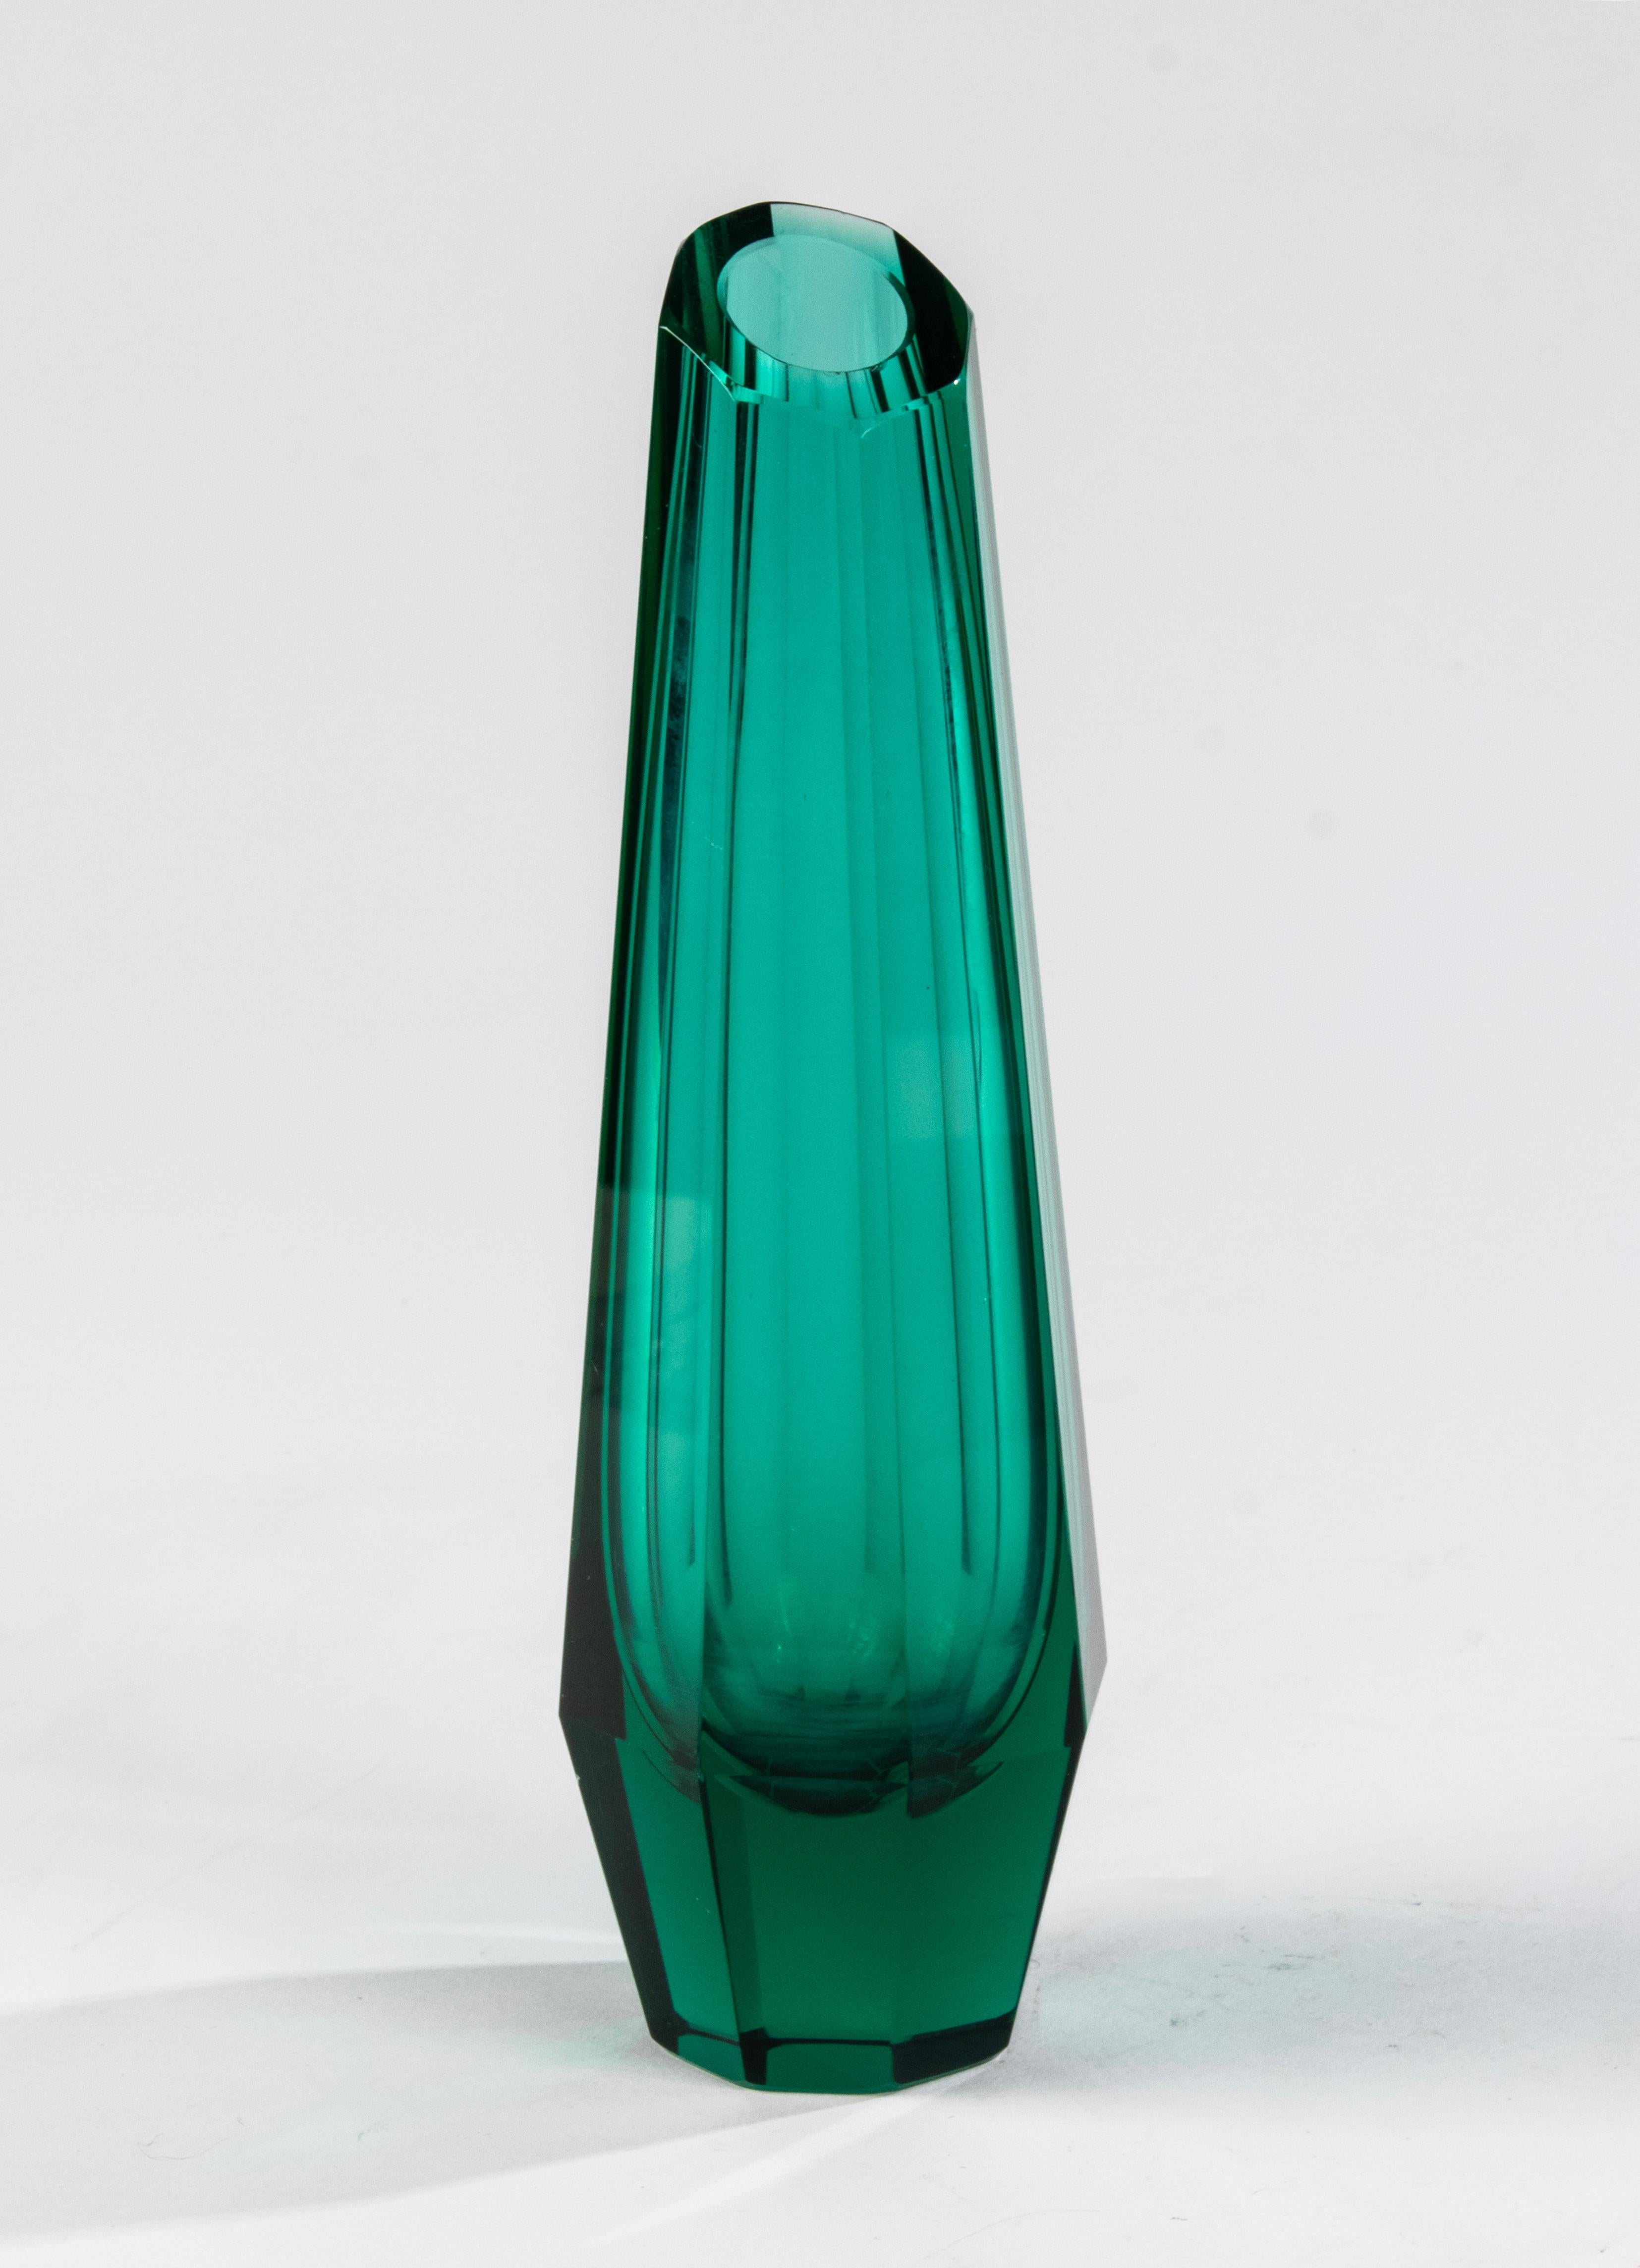 1930's Art Deco Crystal Vase - Attributed to Josef Hoffmann for Moser For Sale 5